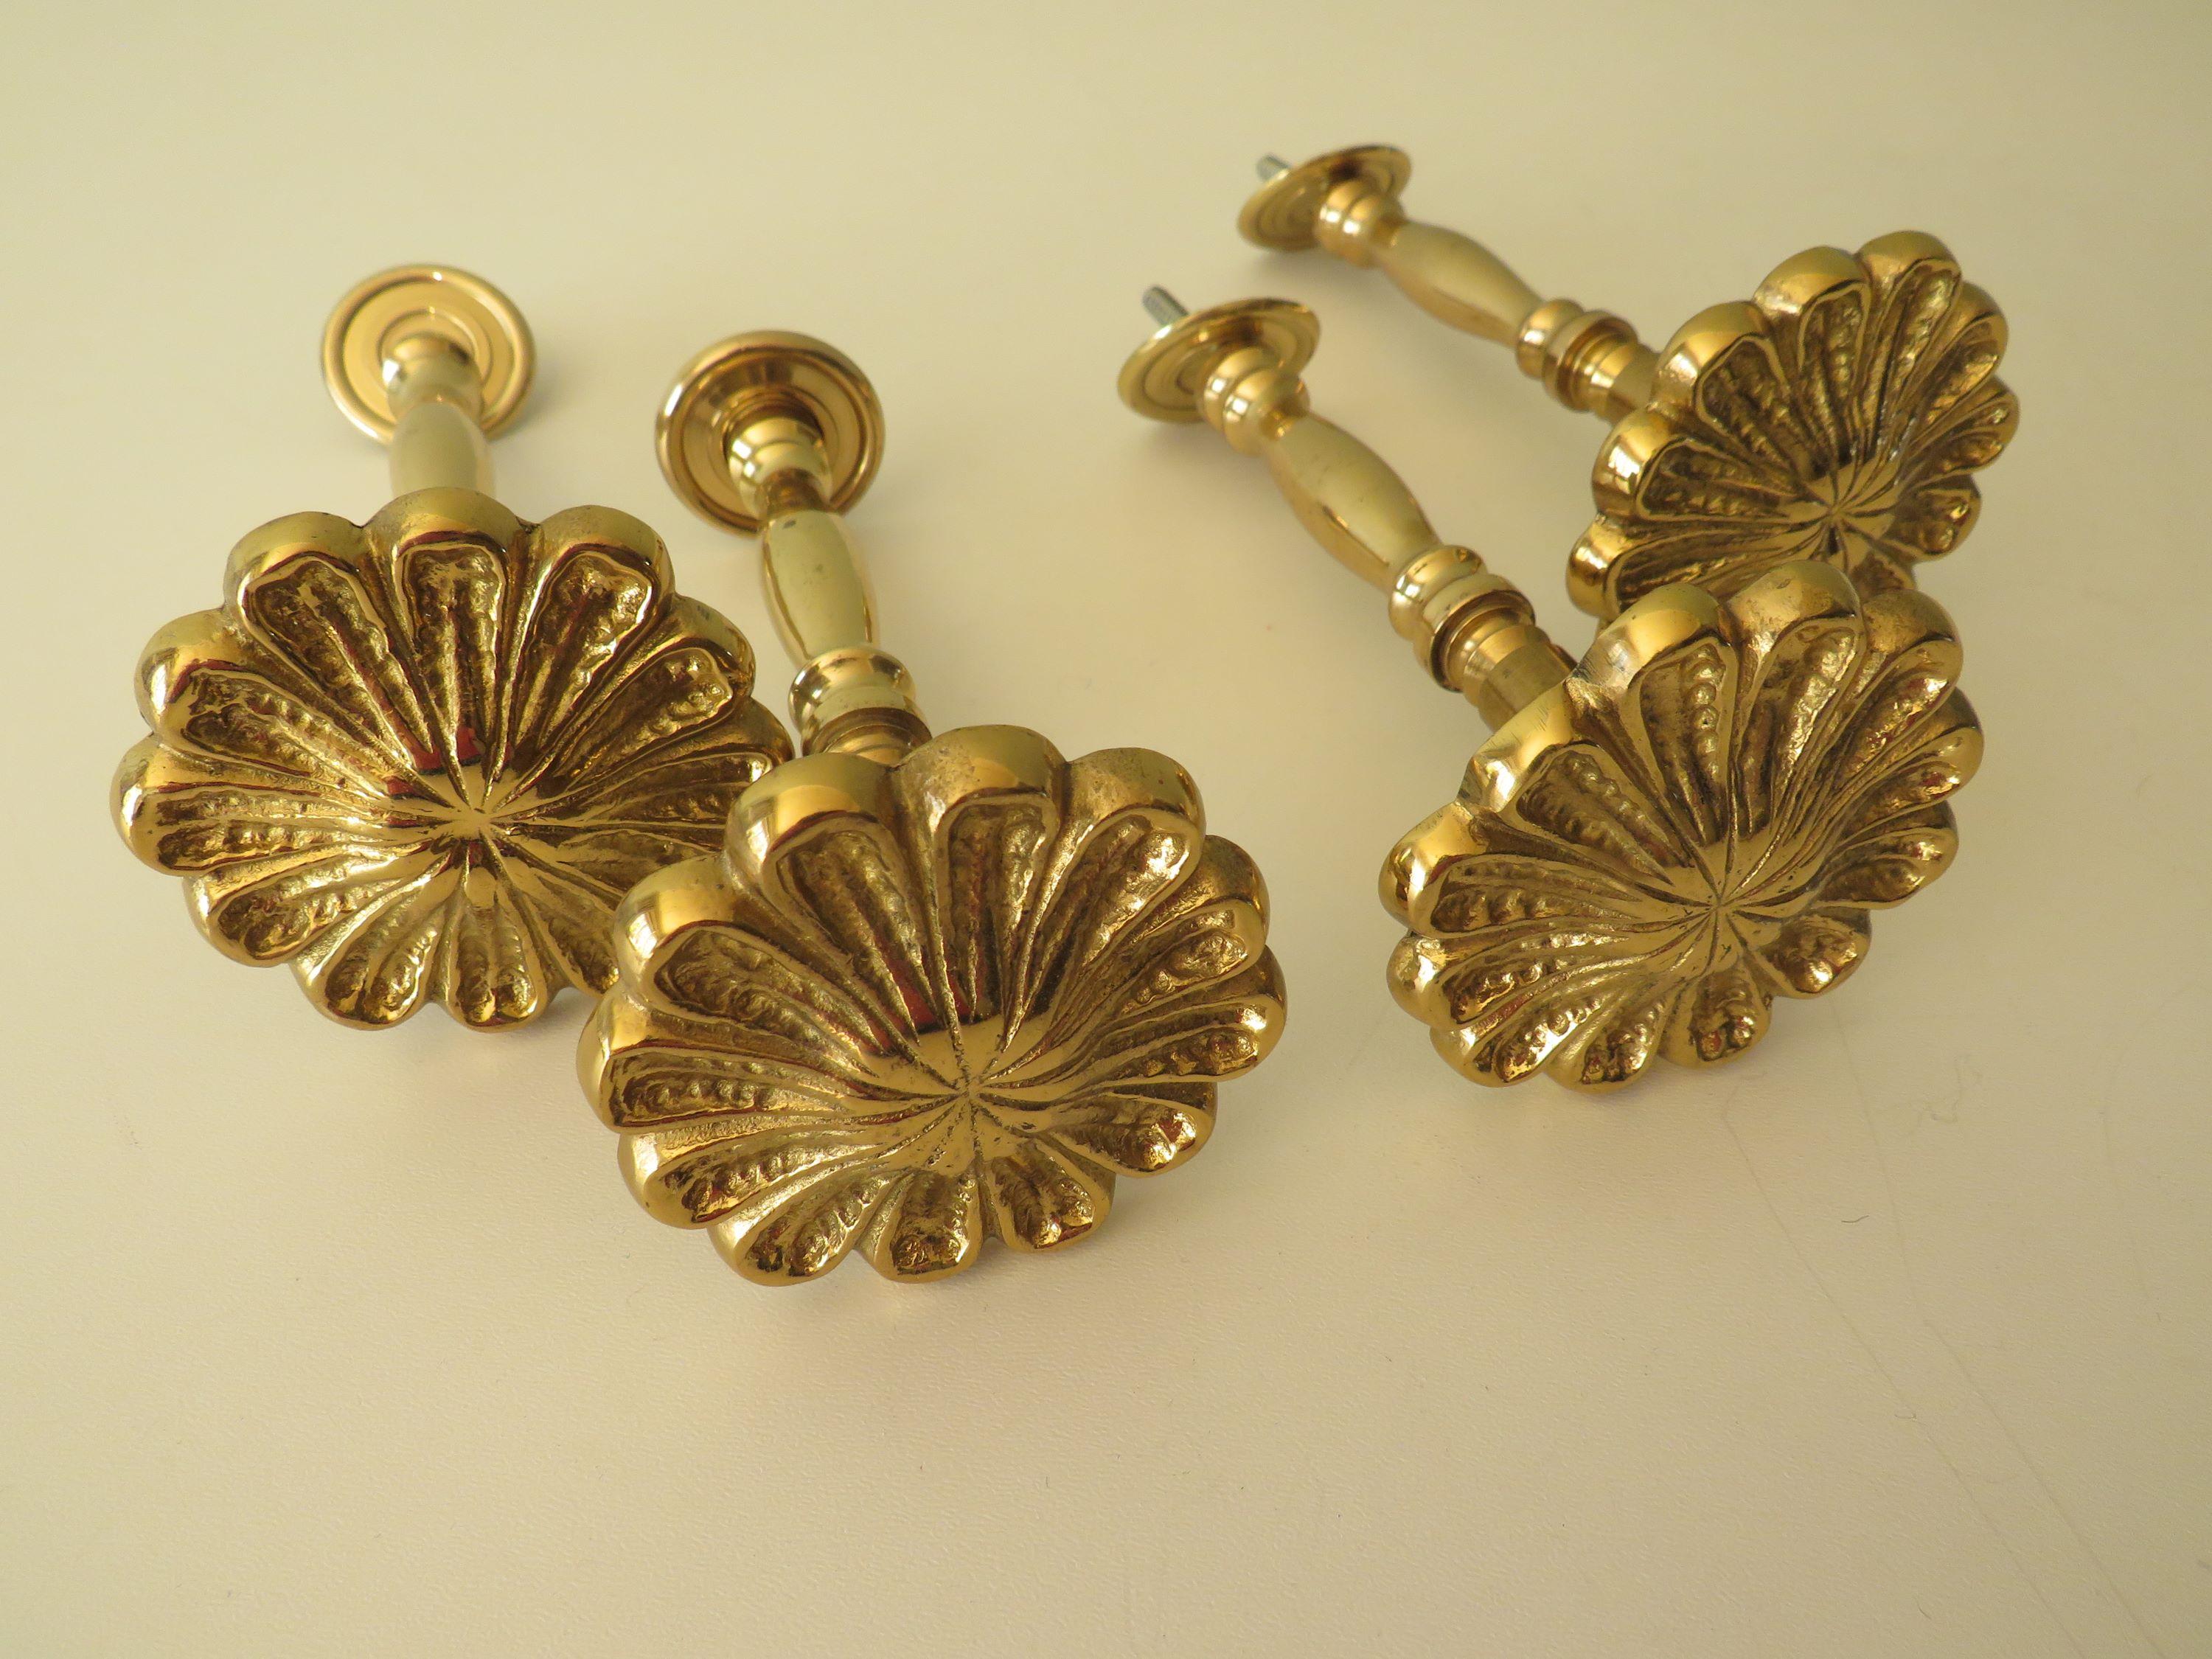 Set of 4 identical mid century curtain holders.
Length from cover plate to rosette: 14 cm.